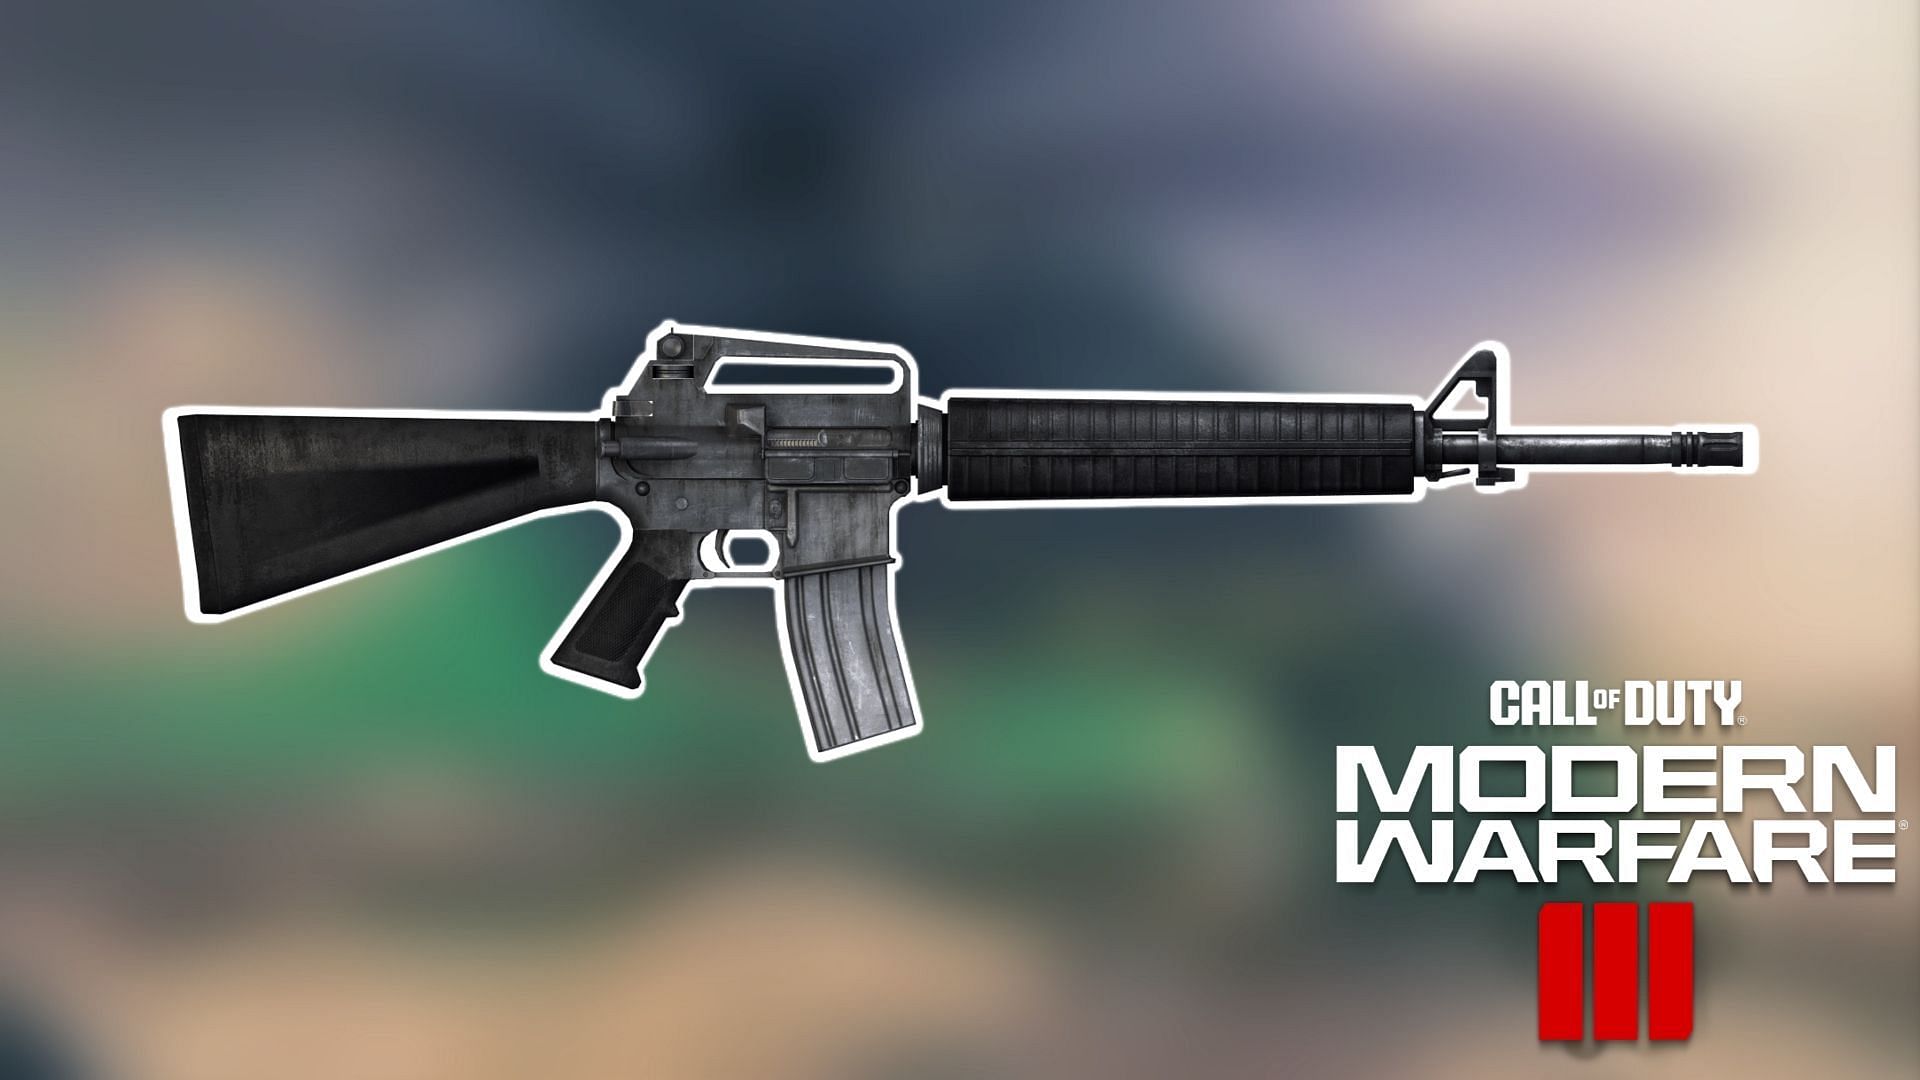 The M16 assault rifle in MW3 Zombies (Image via Activision)